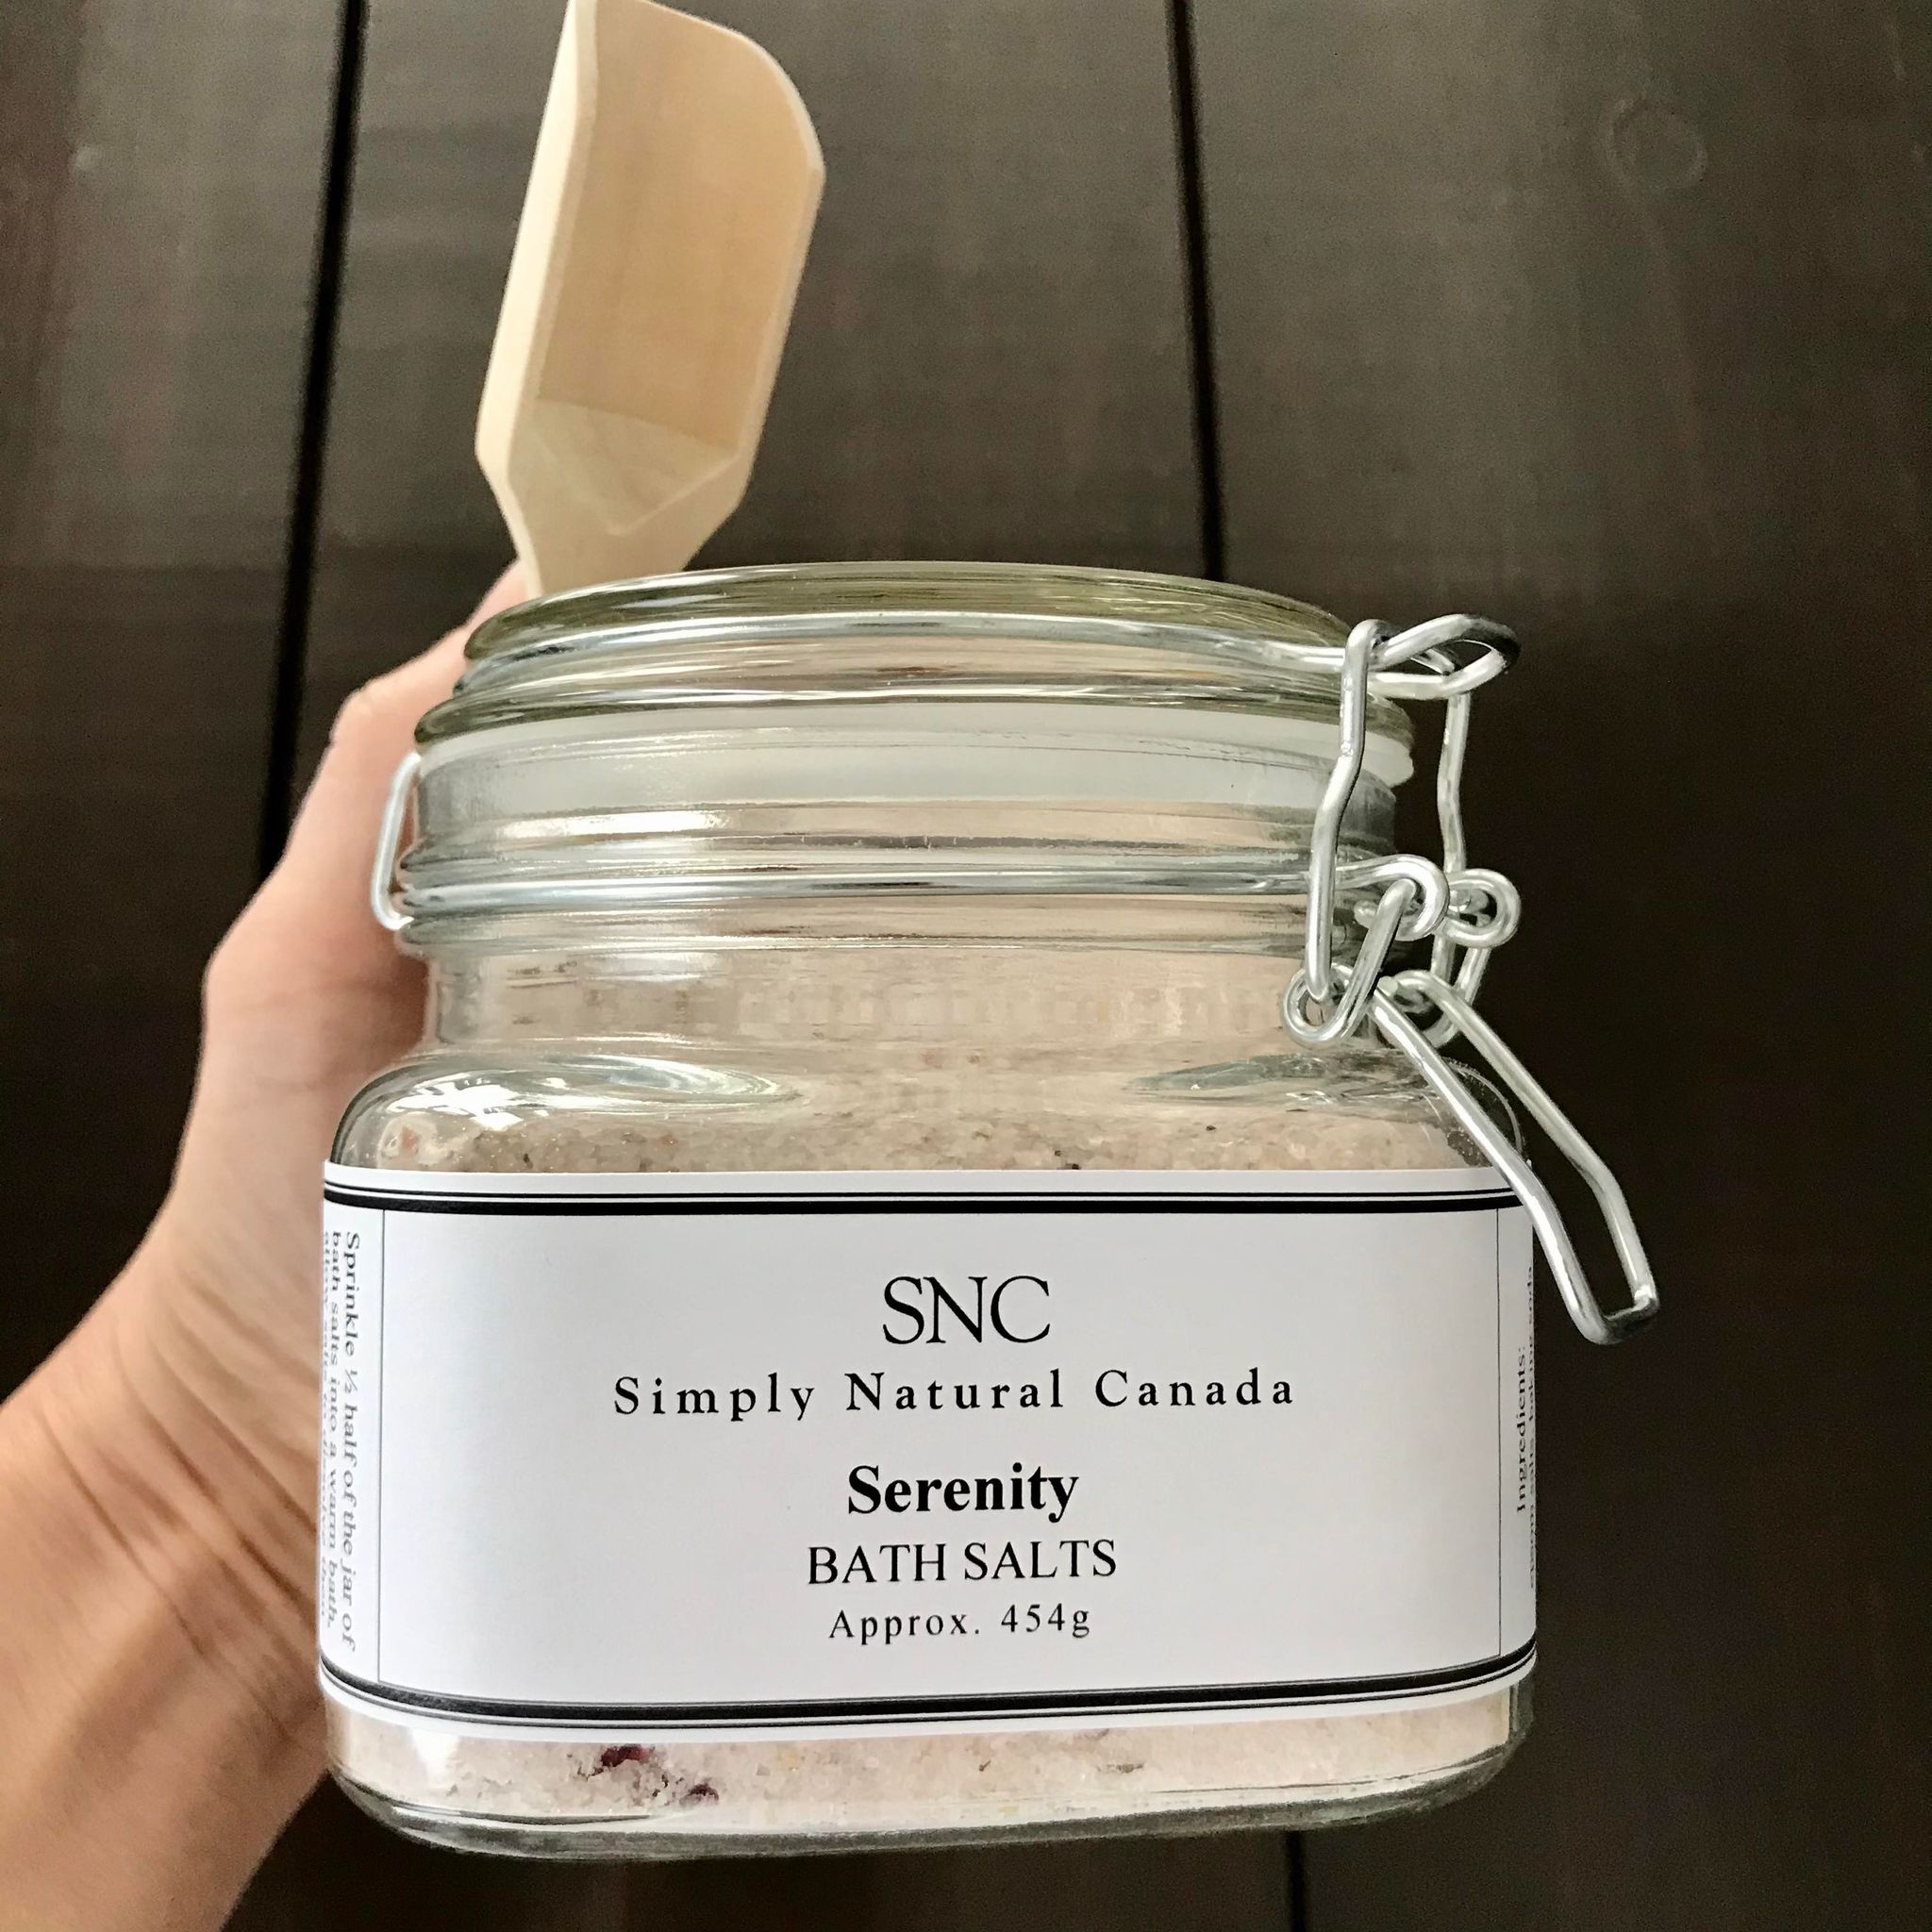 candian made simply natural canada natural floral serenity bath salts in a glass jar with dried flowers and a wooden scoop 